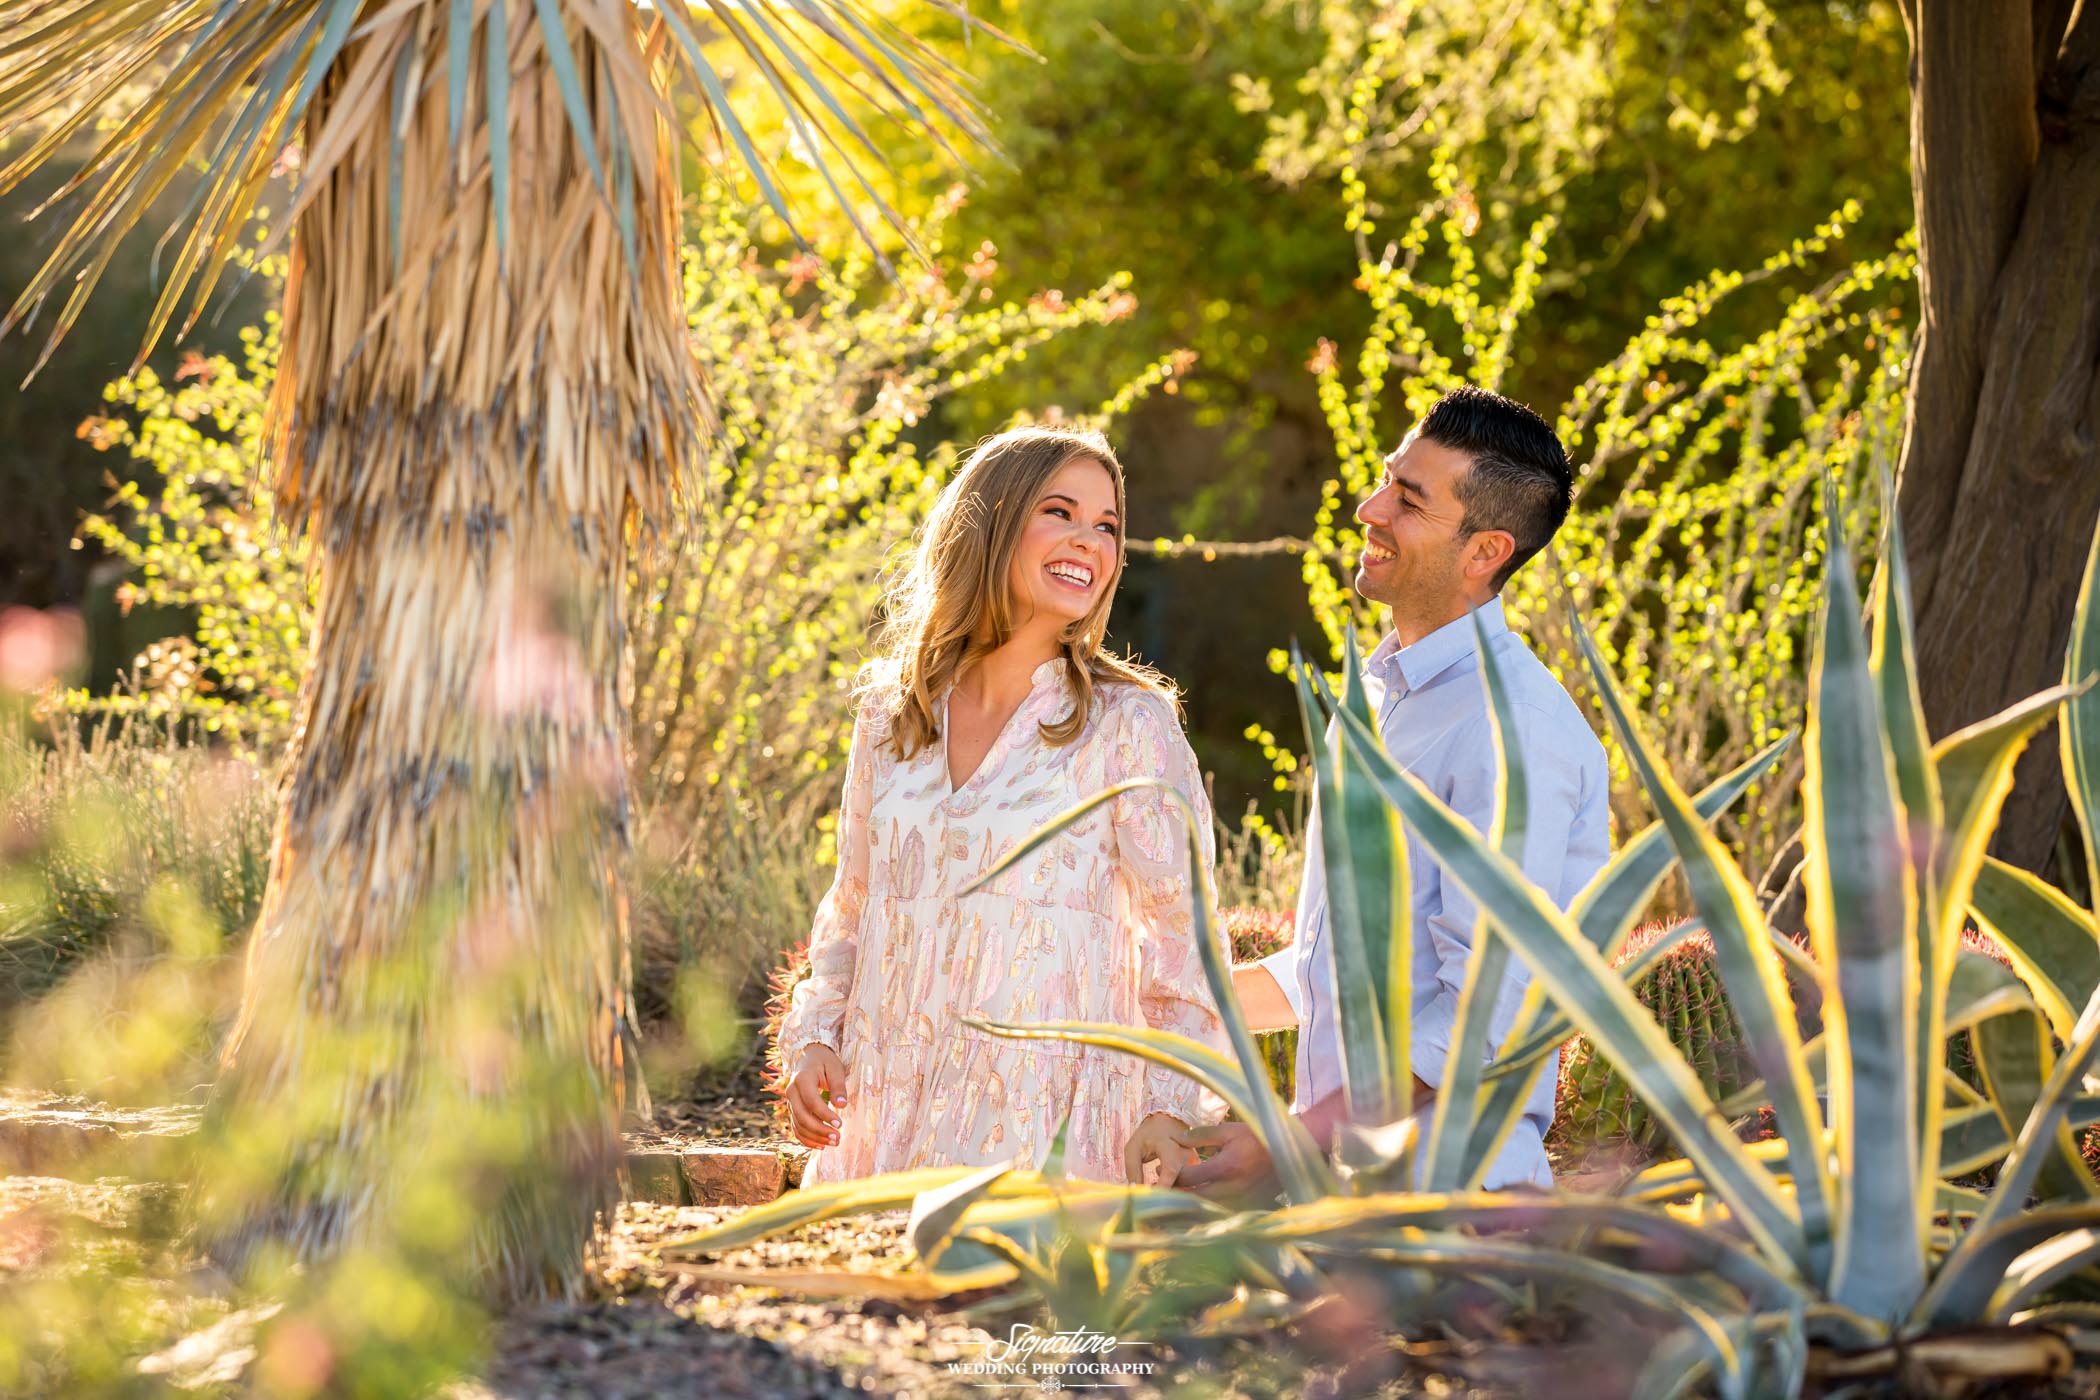 Couple looking over shoulder at each other smiling surrounded by desert plants